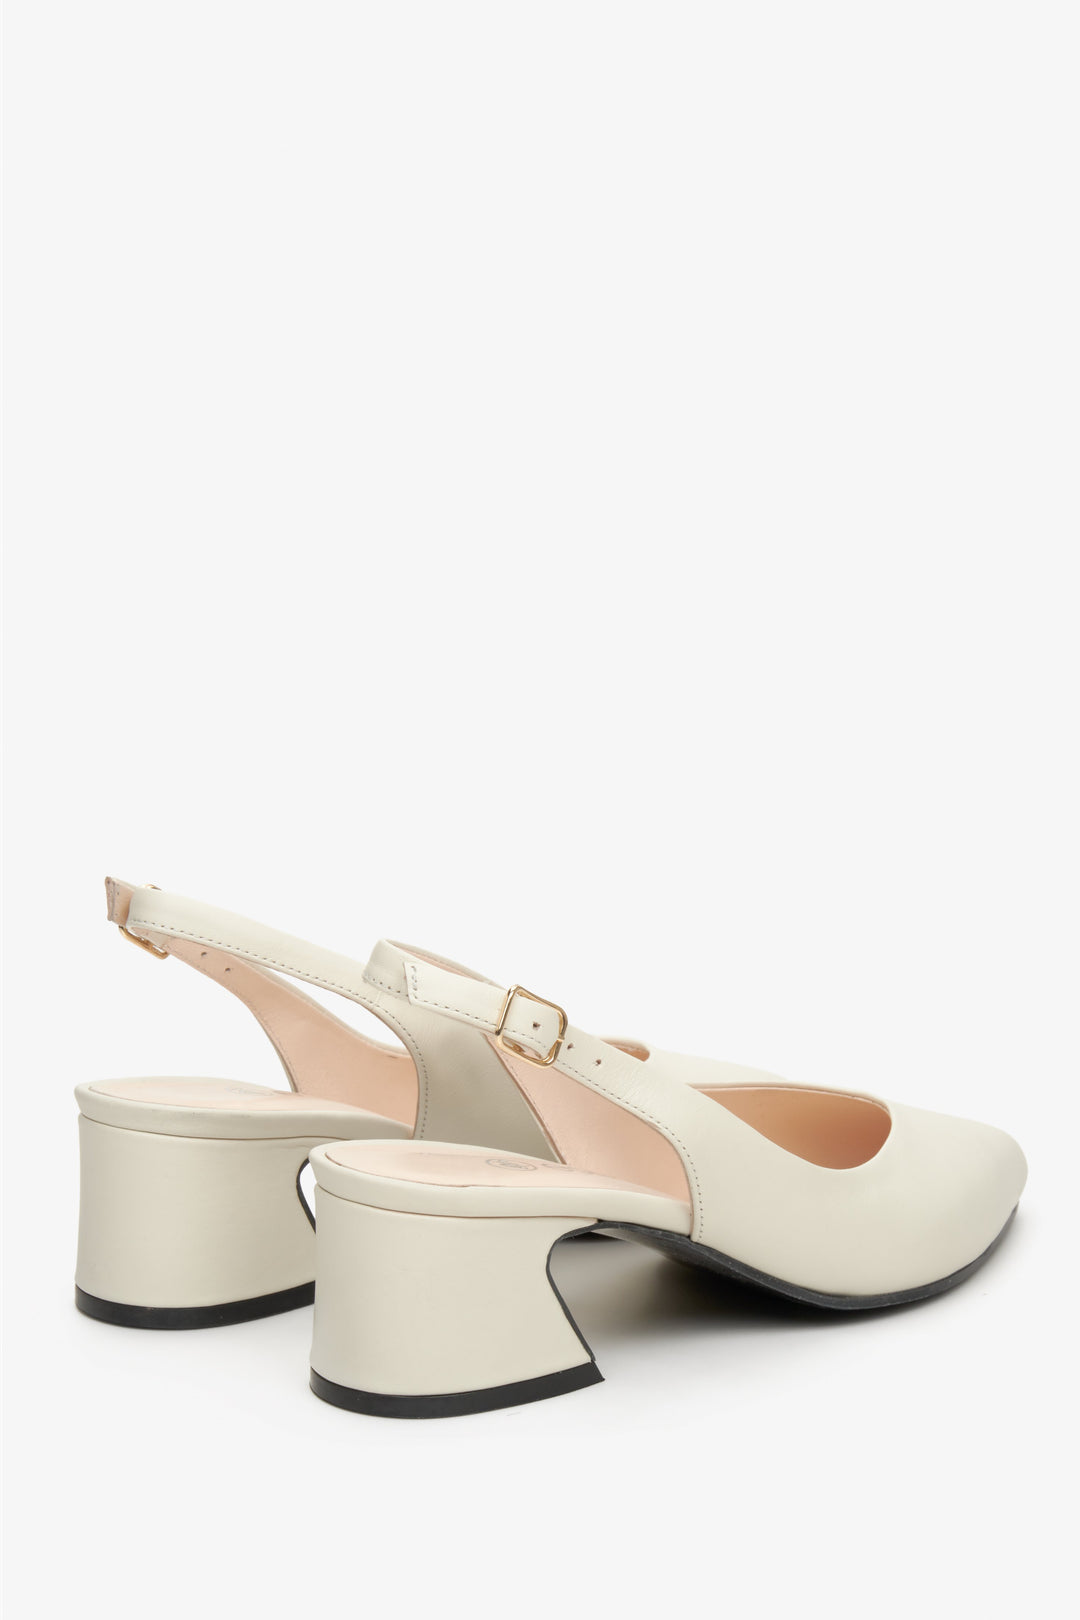 Women's light beige leather pumps with heels by Estro - presentation of the back of the shoes.